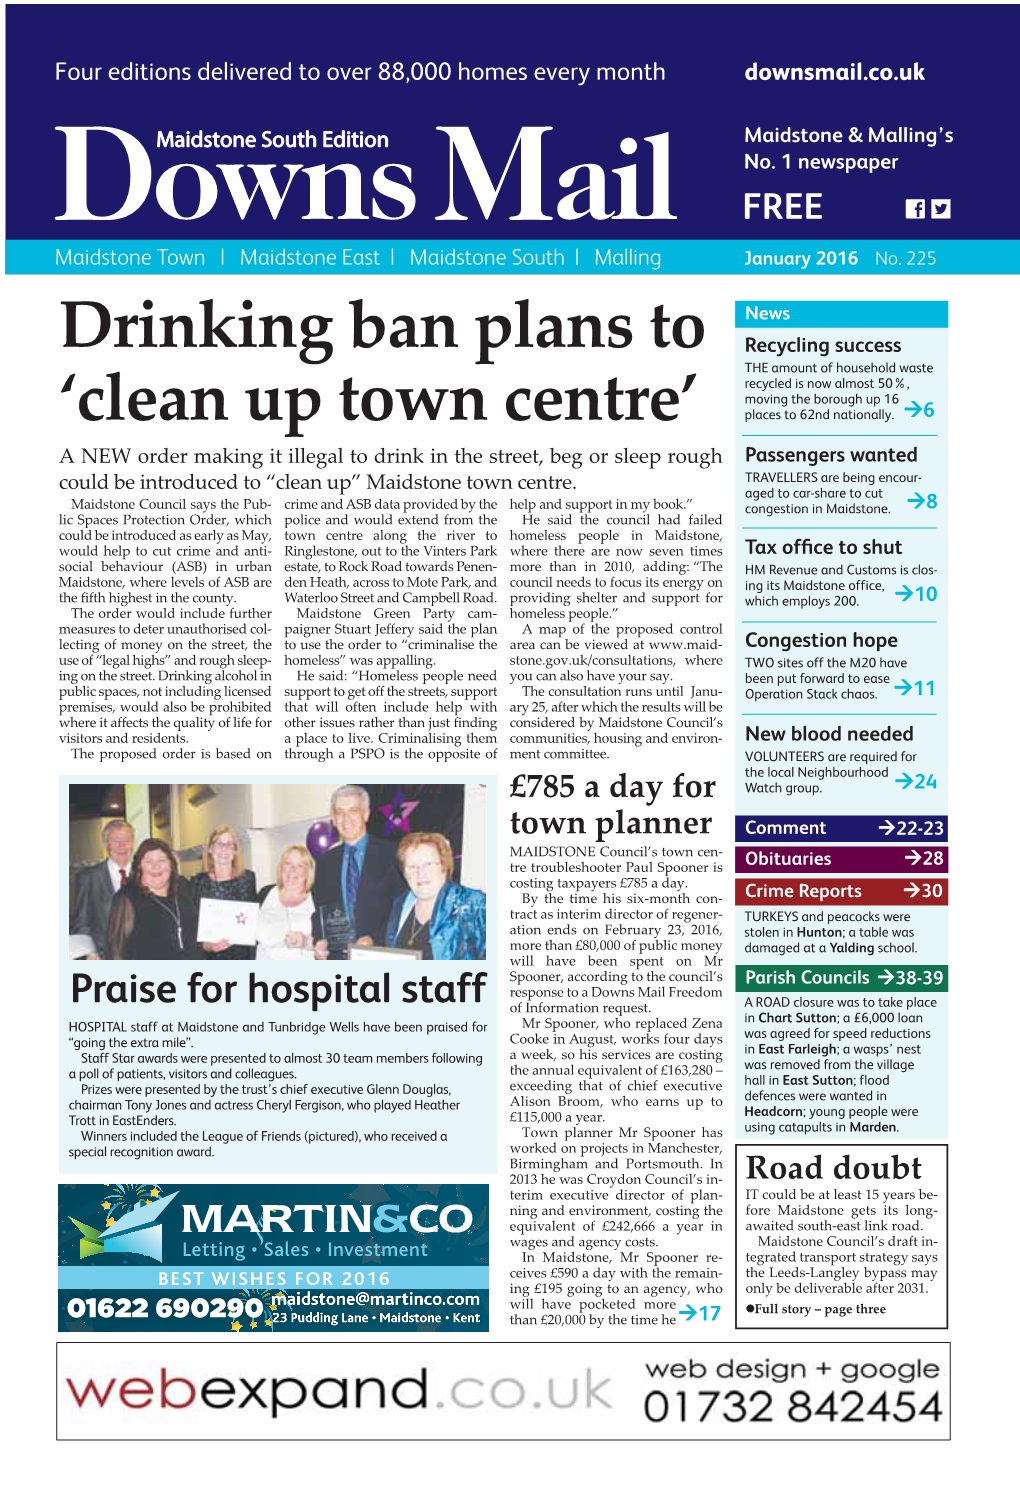 Drinking Ban Plans to 'Clean up Town Centre'